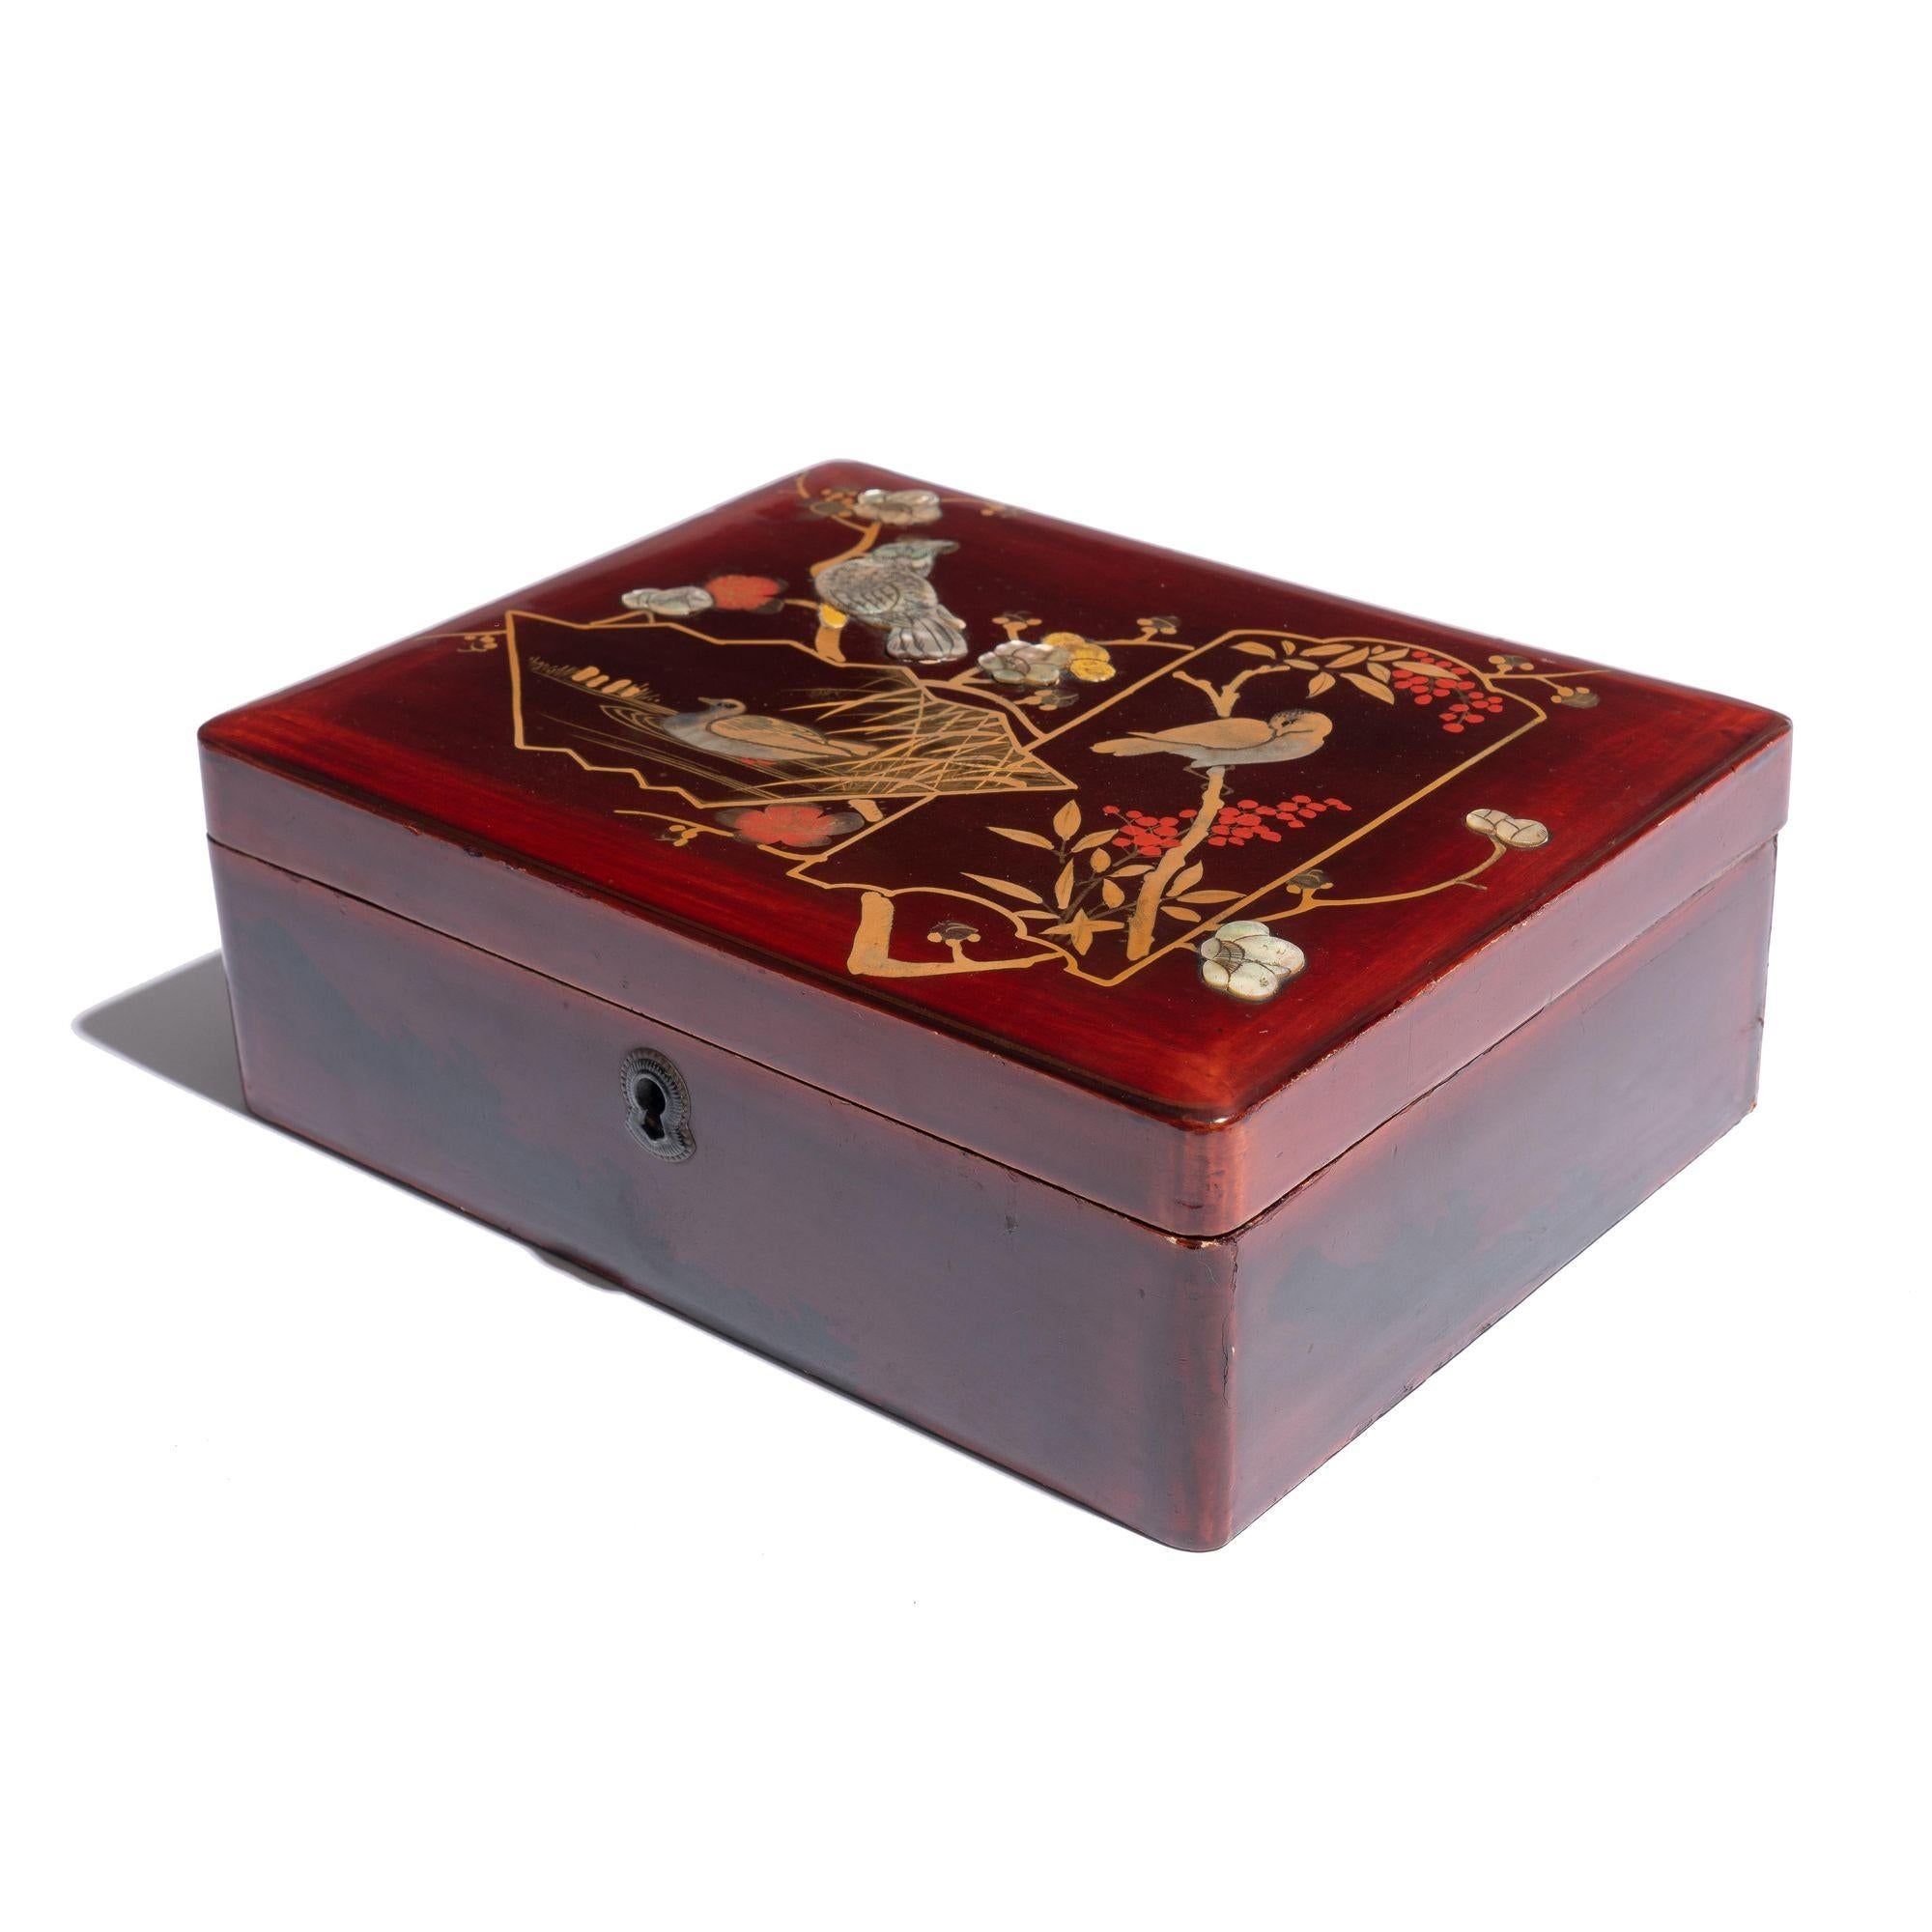 Antique Japanese Lacquered, Enameled, and Inlaid Box With Hinged Lid, c. 1800's For Sale 4